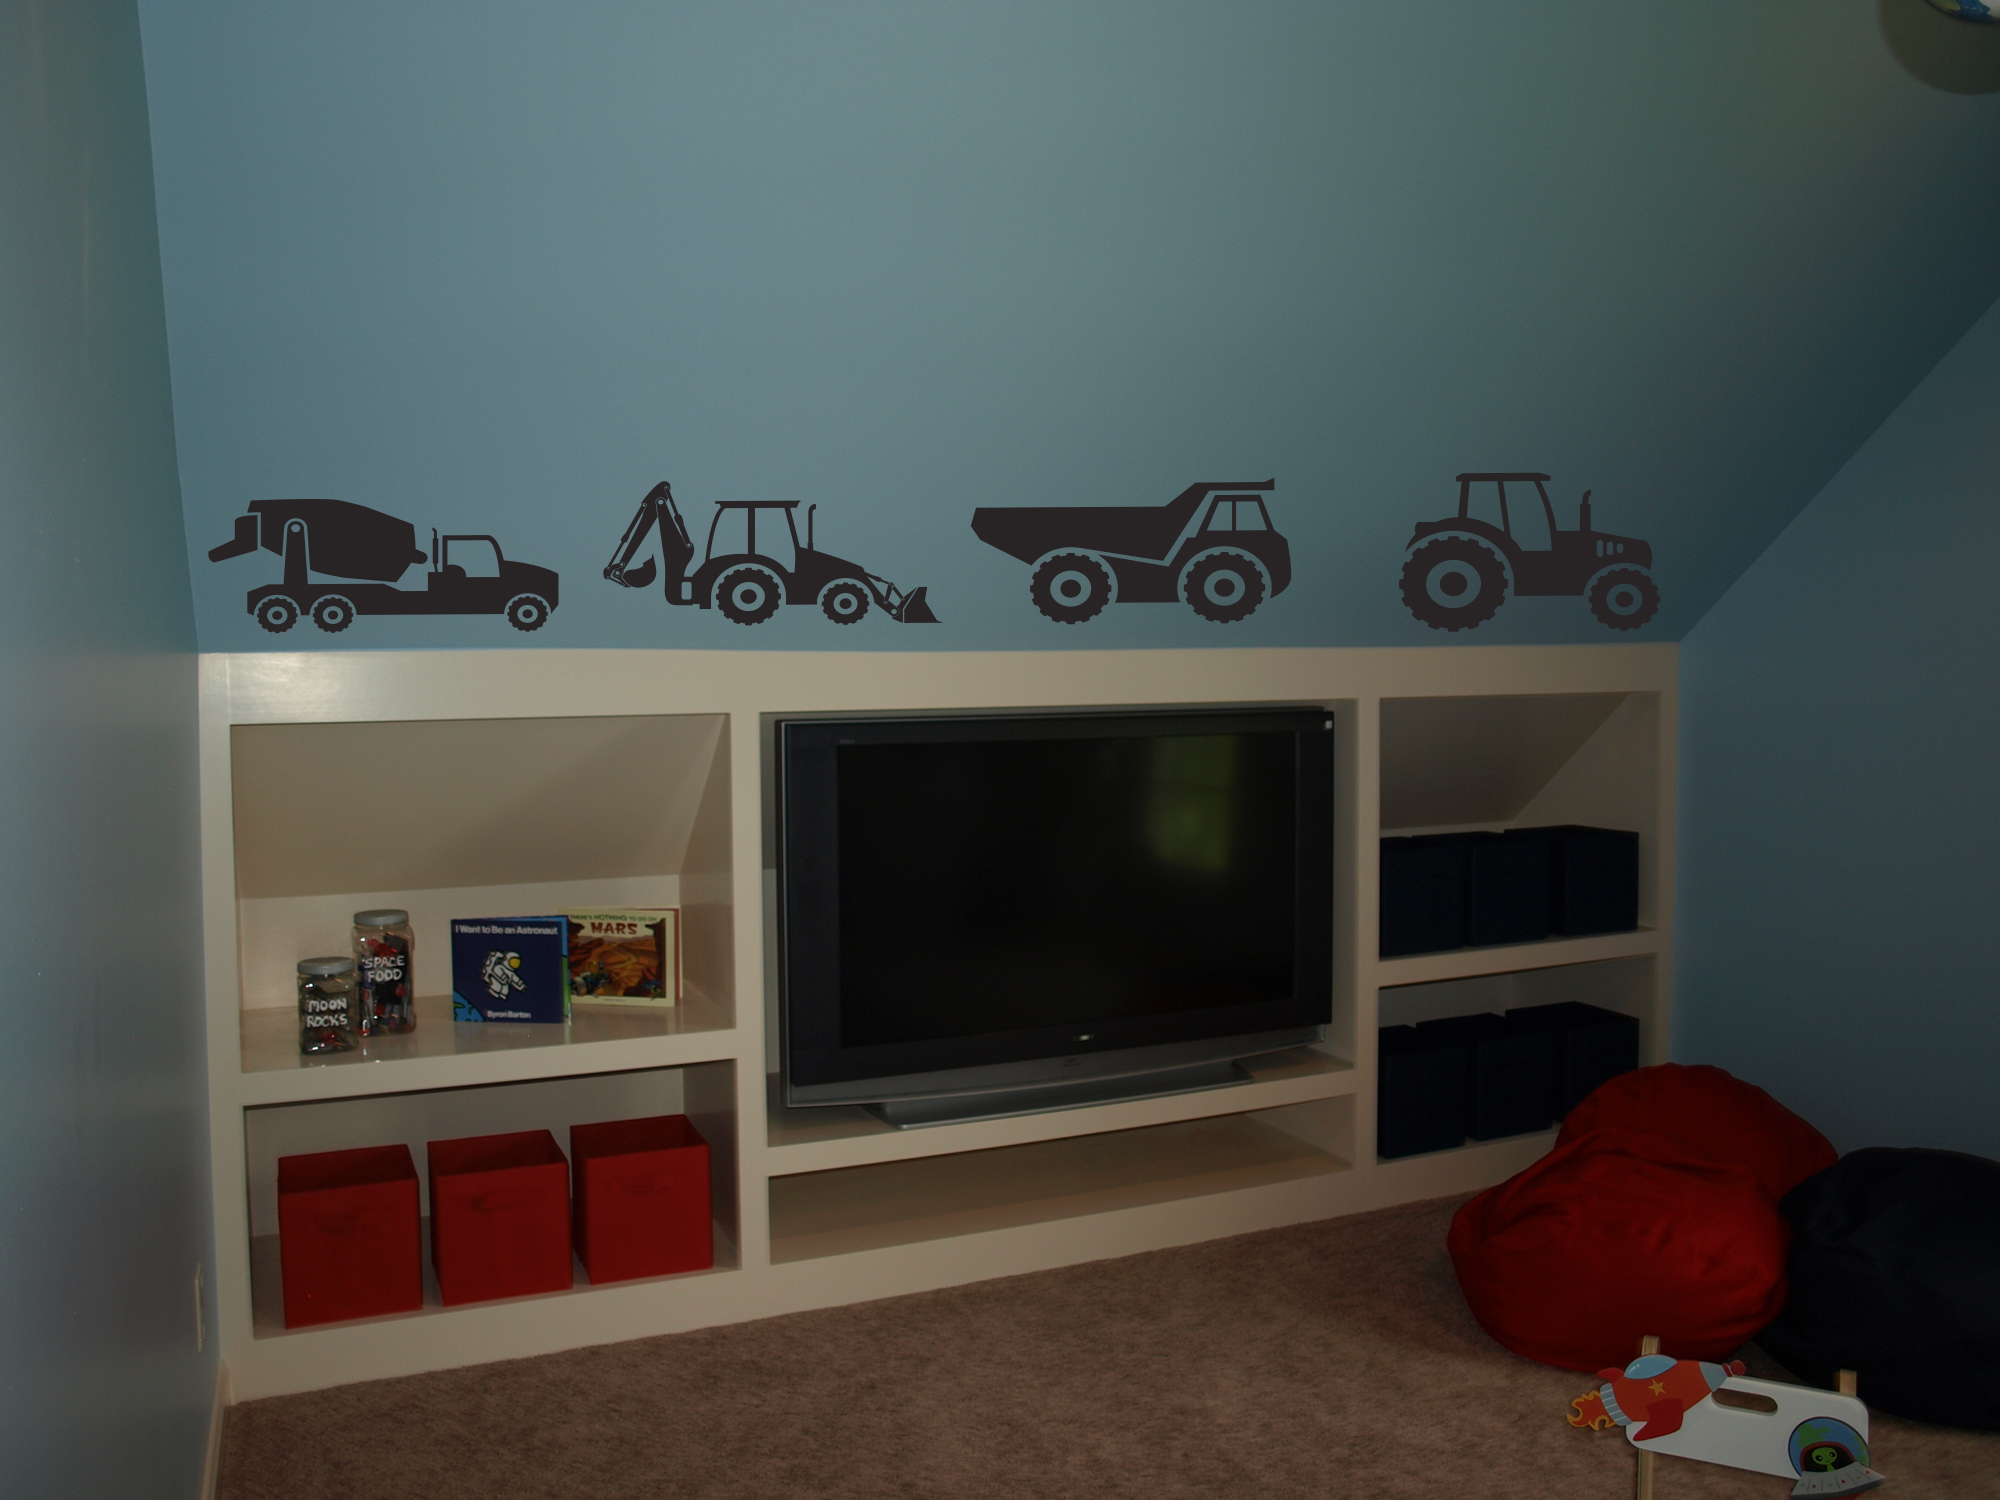 Construction Pack Wall Decal